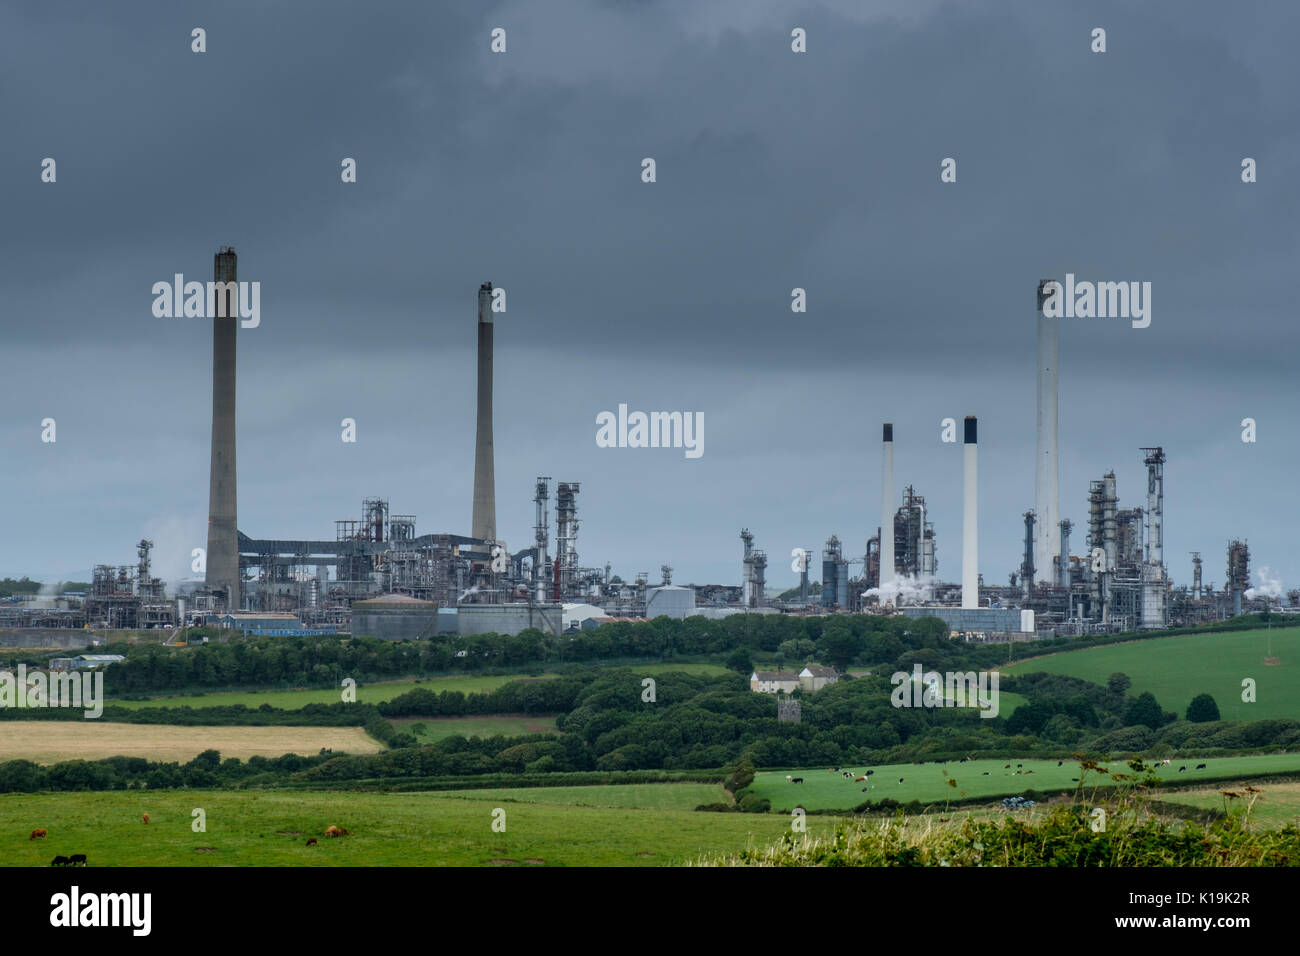 Milford Haven Oil Refinery, Milford Haven, Pembrokeshire, Wales, UK Stock Photo